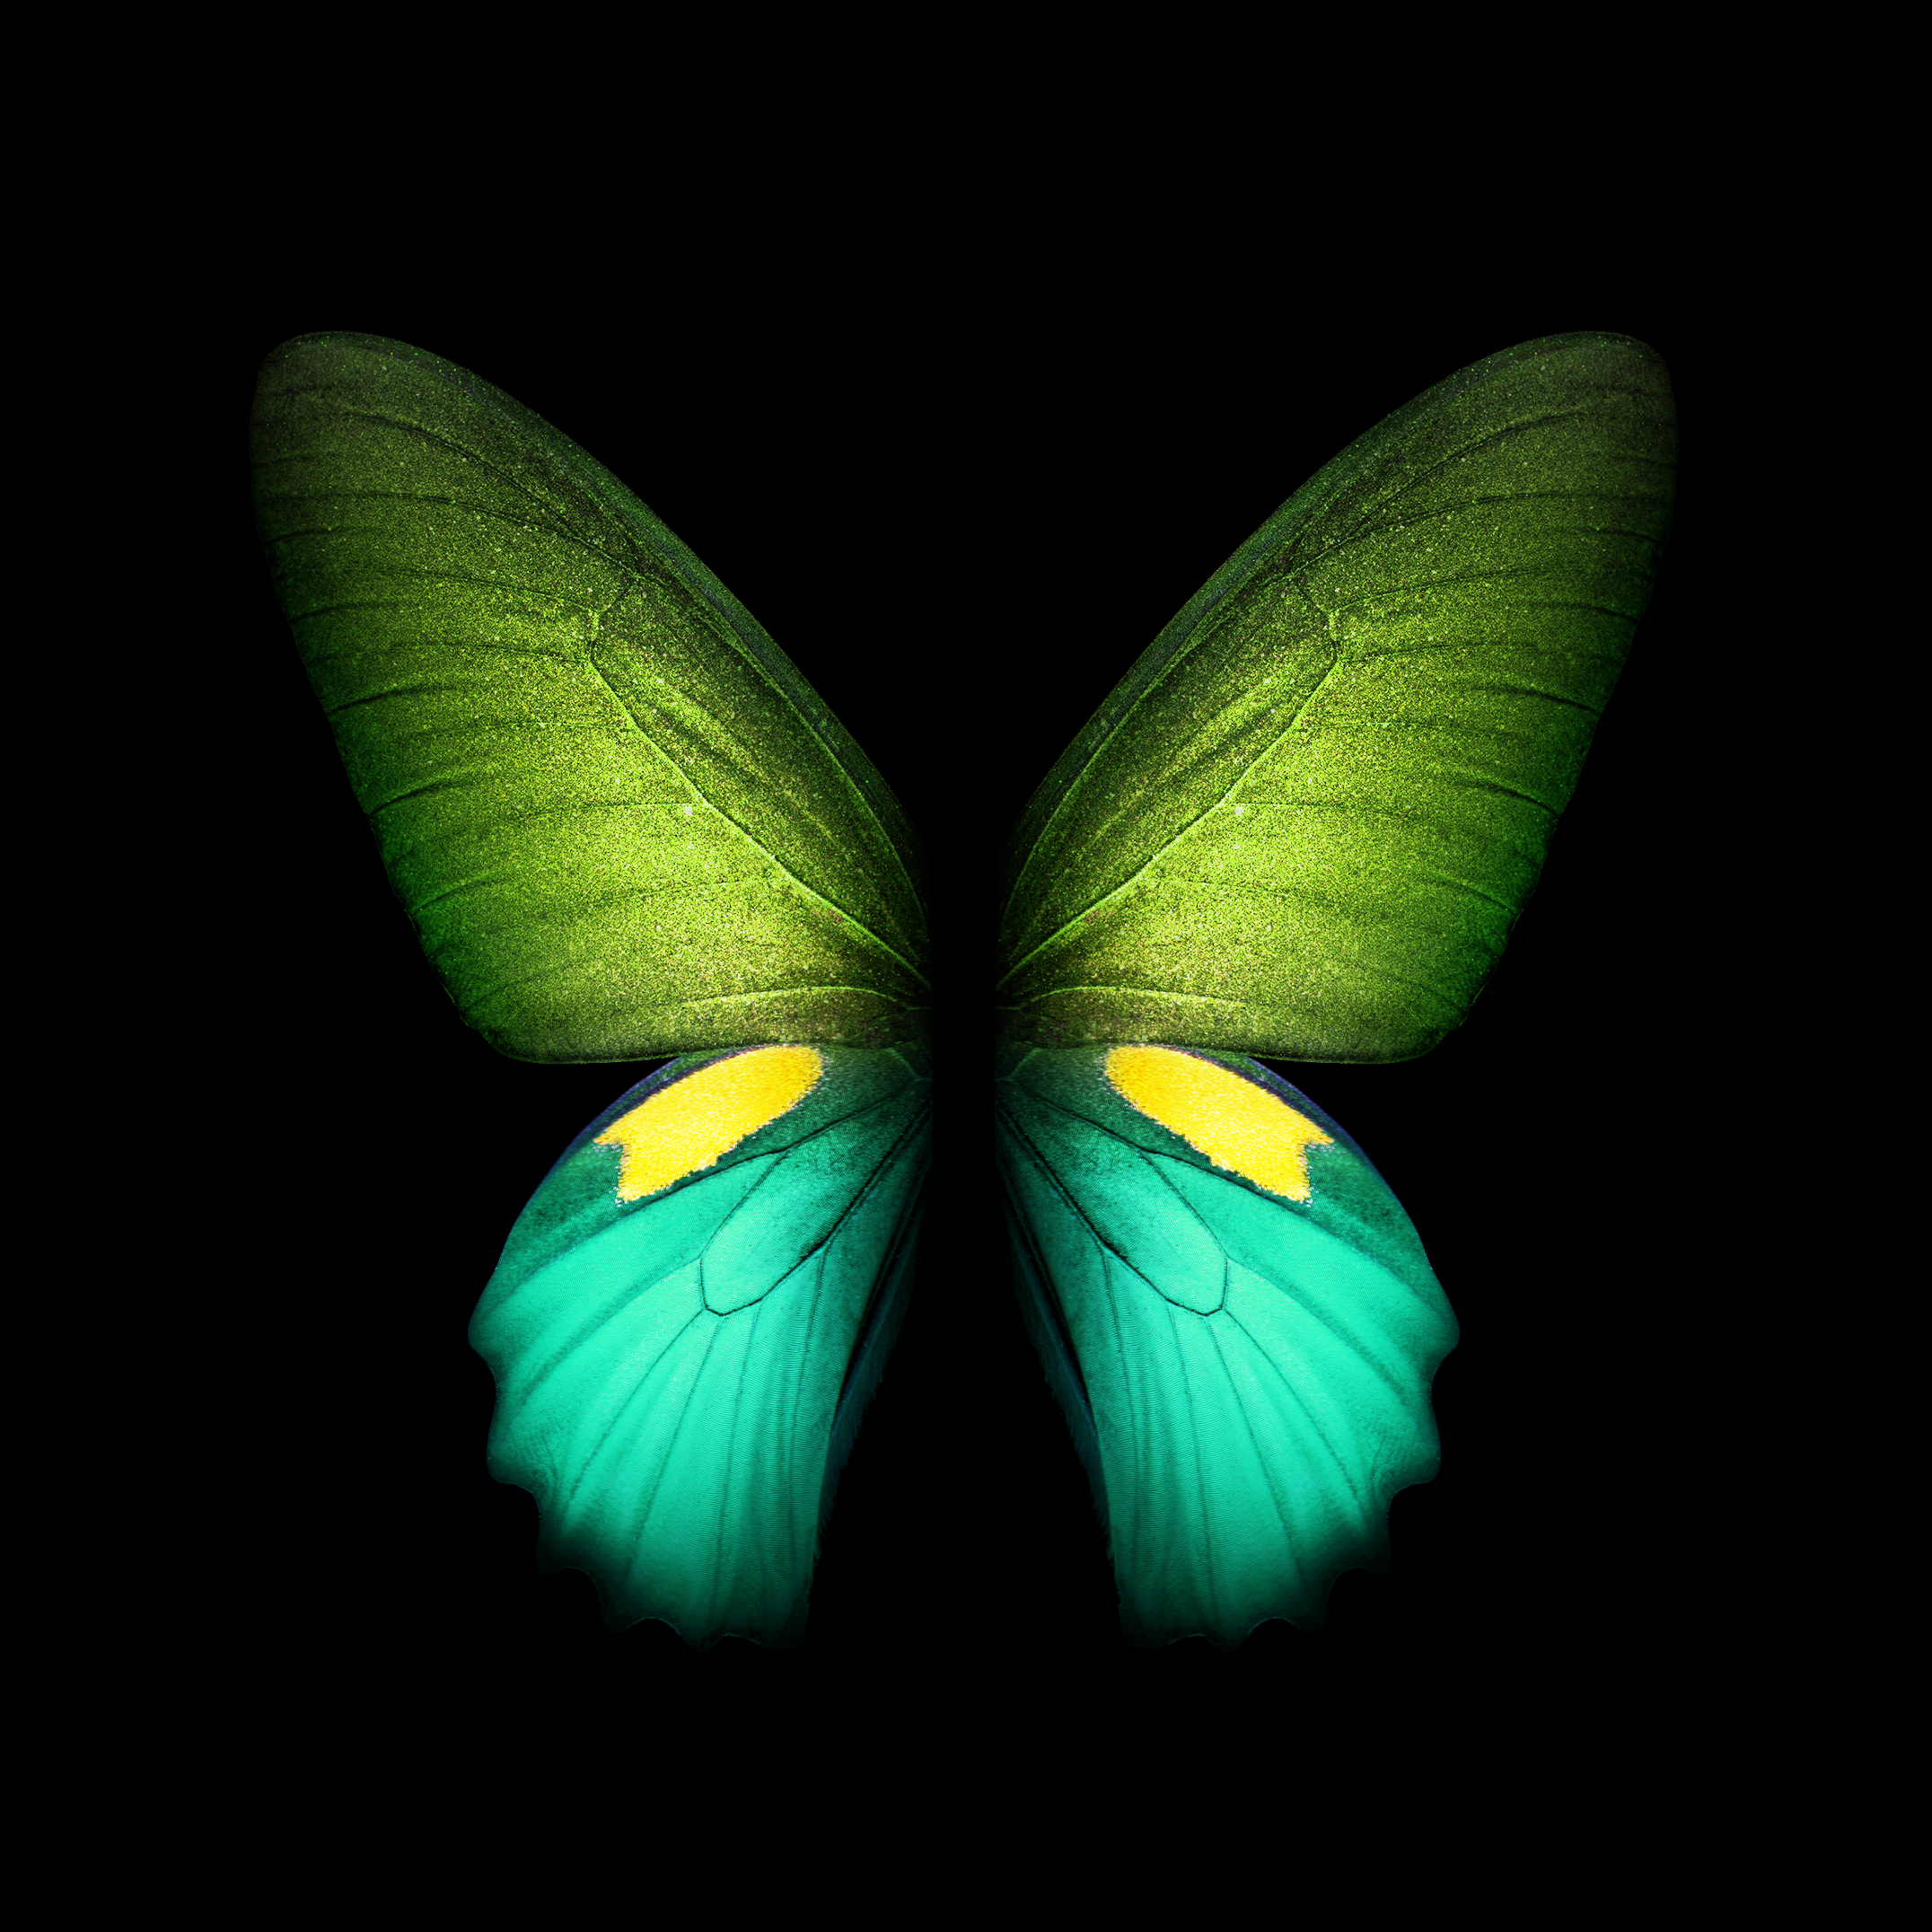 Samsung Galaxy Fold Live And Static Wallpaper Available For